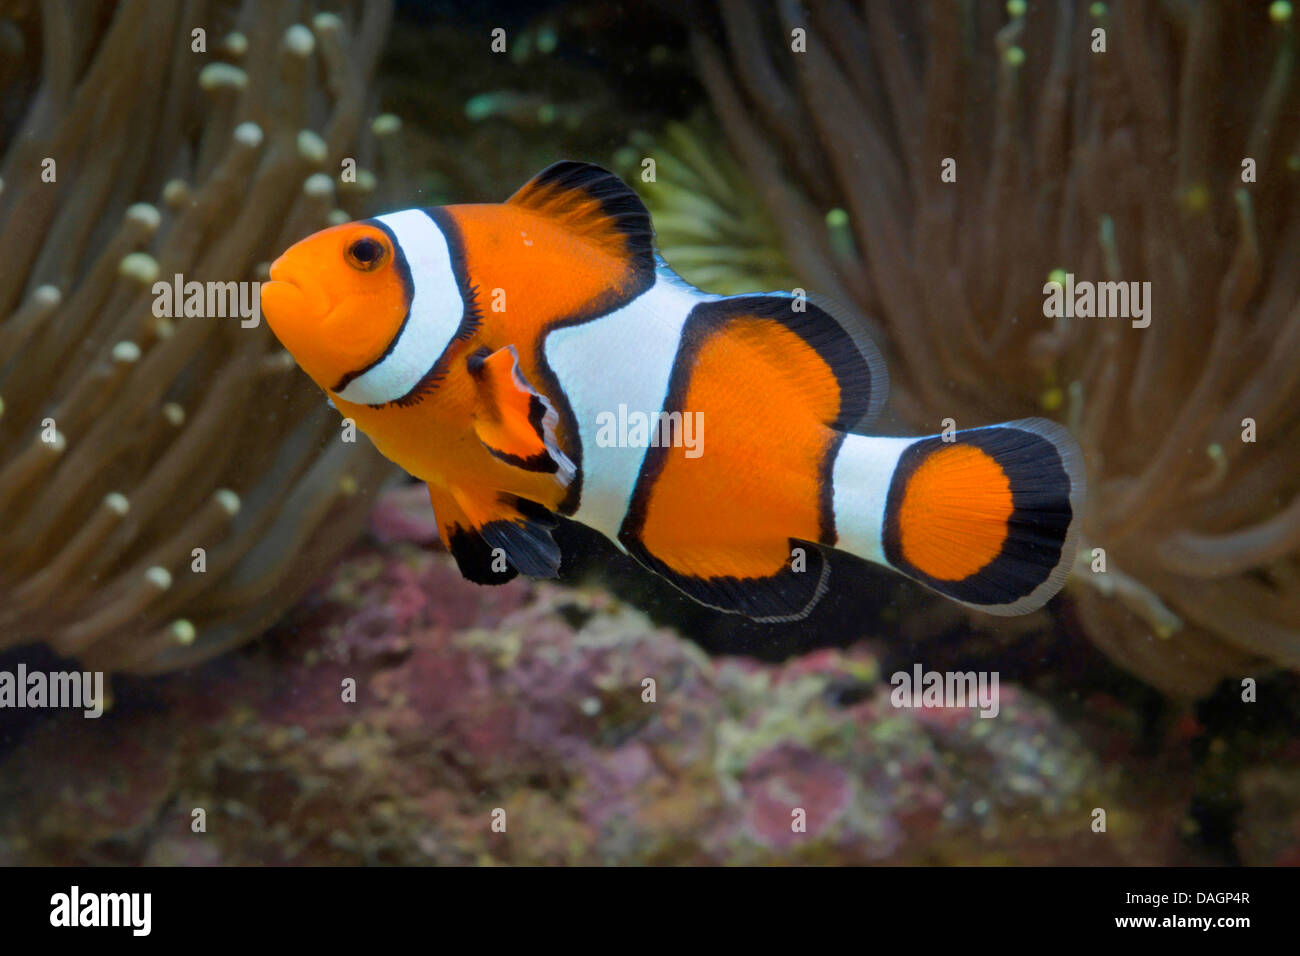 Orange clownfish, Clown anemonefish (Amphiprion percula), amongst the tentacles of a sea anemone Stock Photo